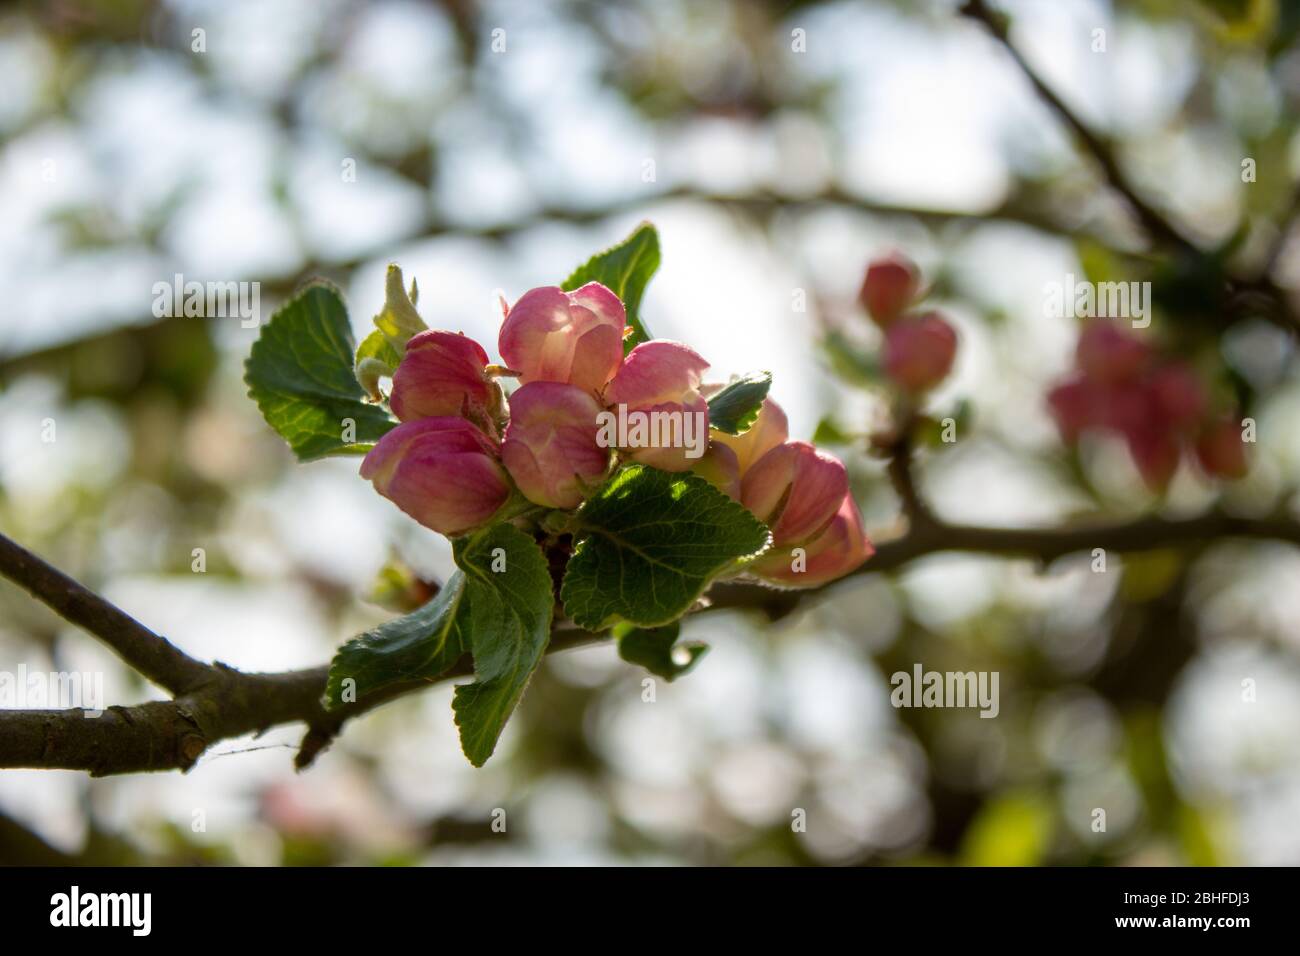 View of still locked apple tree blossoms on a sunny spring day Stock Photo